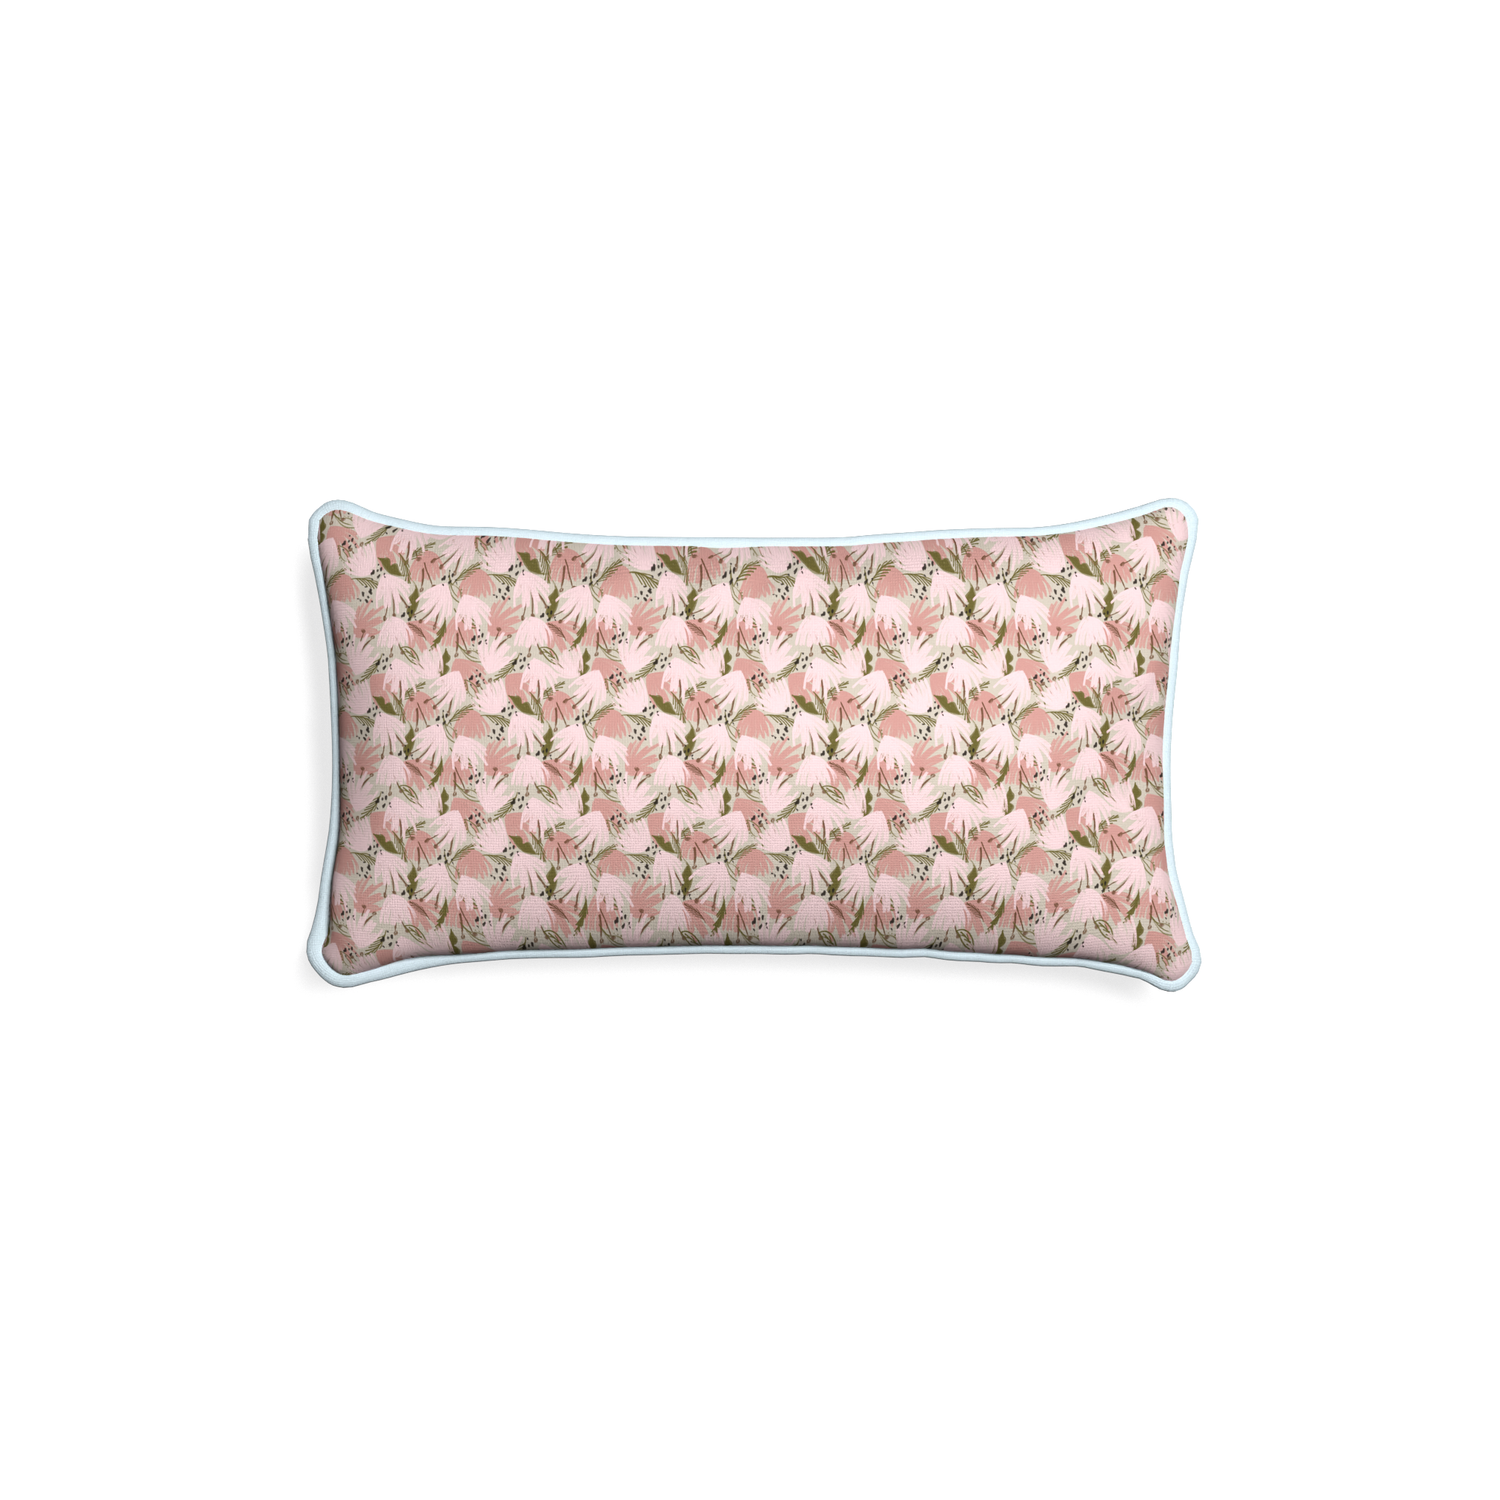 Petite-lumbar eden pink custom pink floralpillow with powder piping on white background